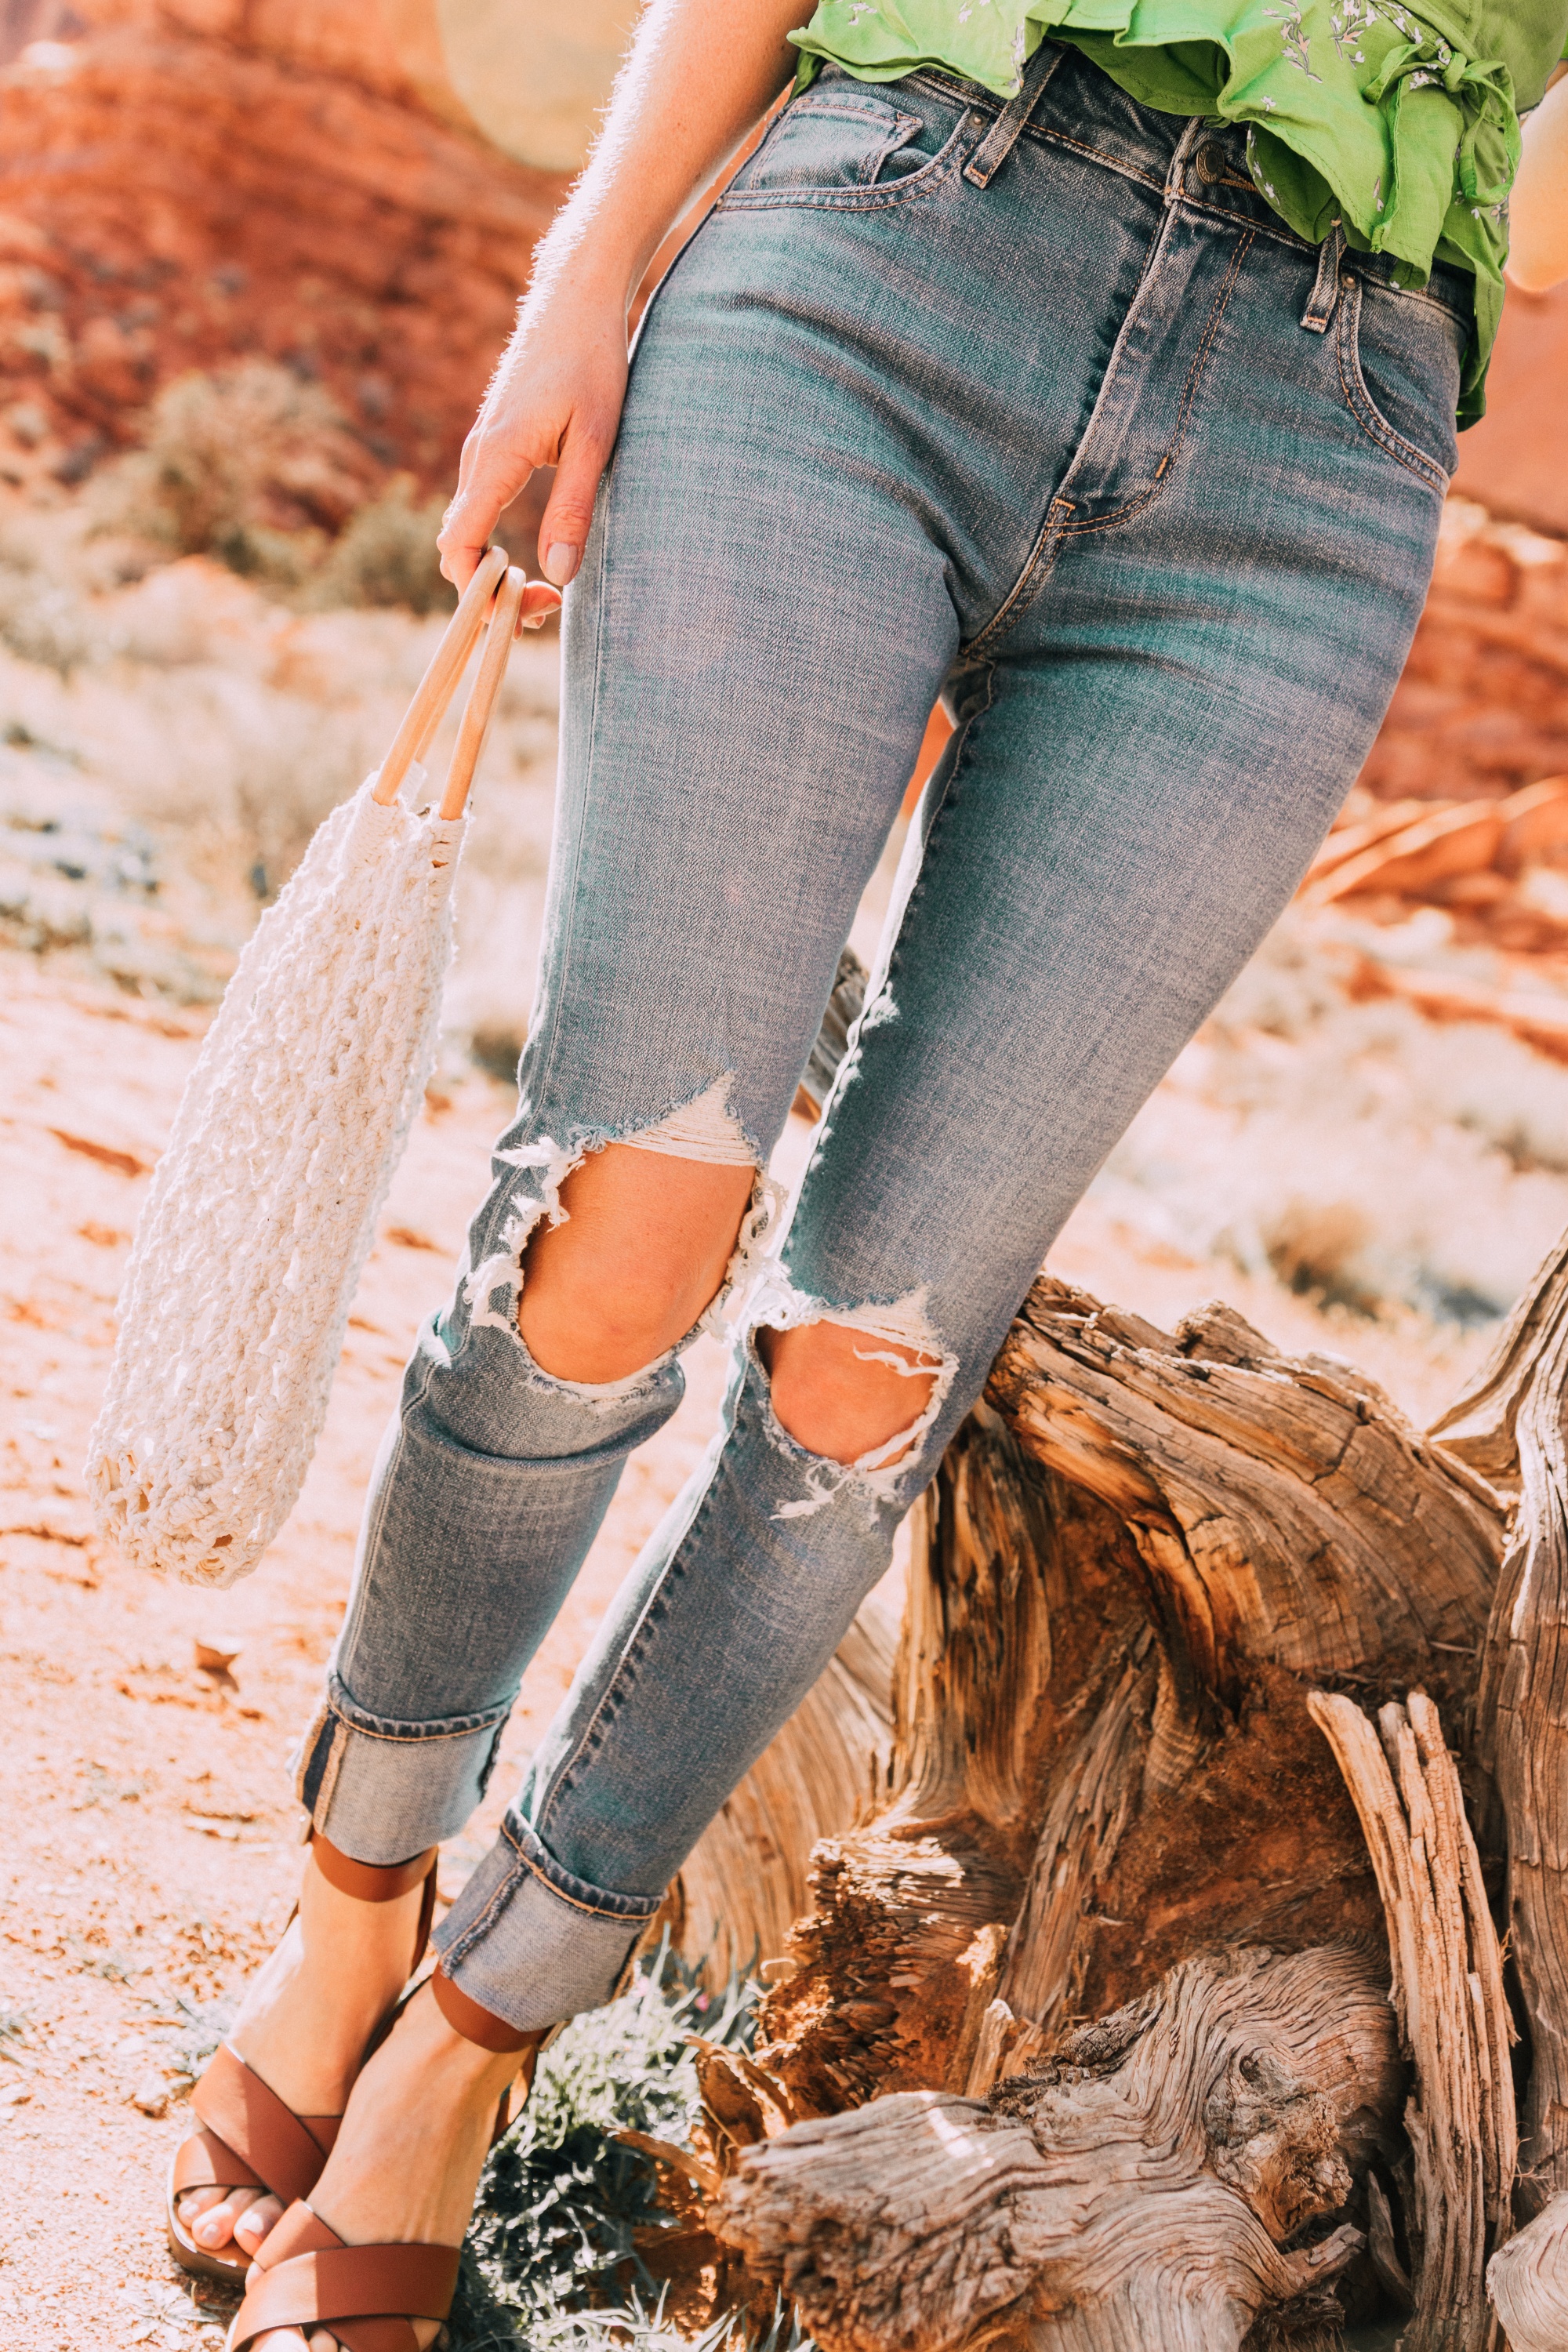 Good For The Globe, Fashion blogger Erin Busbee of BusbeeStyle.com featuring Levi 721 skinny jeans, a green floral Faithfull The Brand top, Kayu rope bag from Bloomingdale's in Moab, Utah